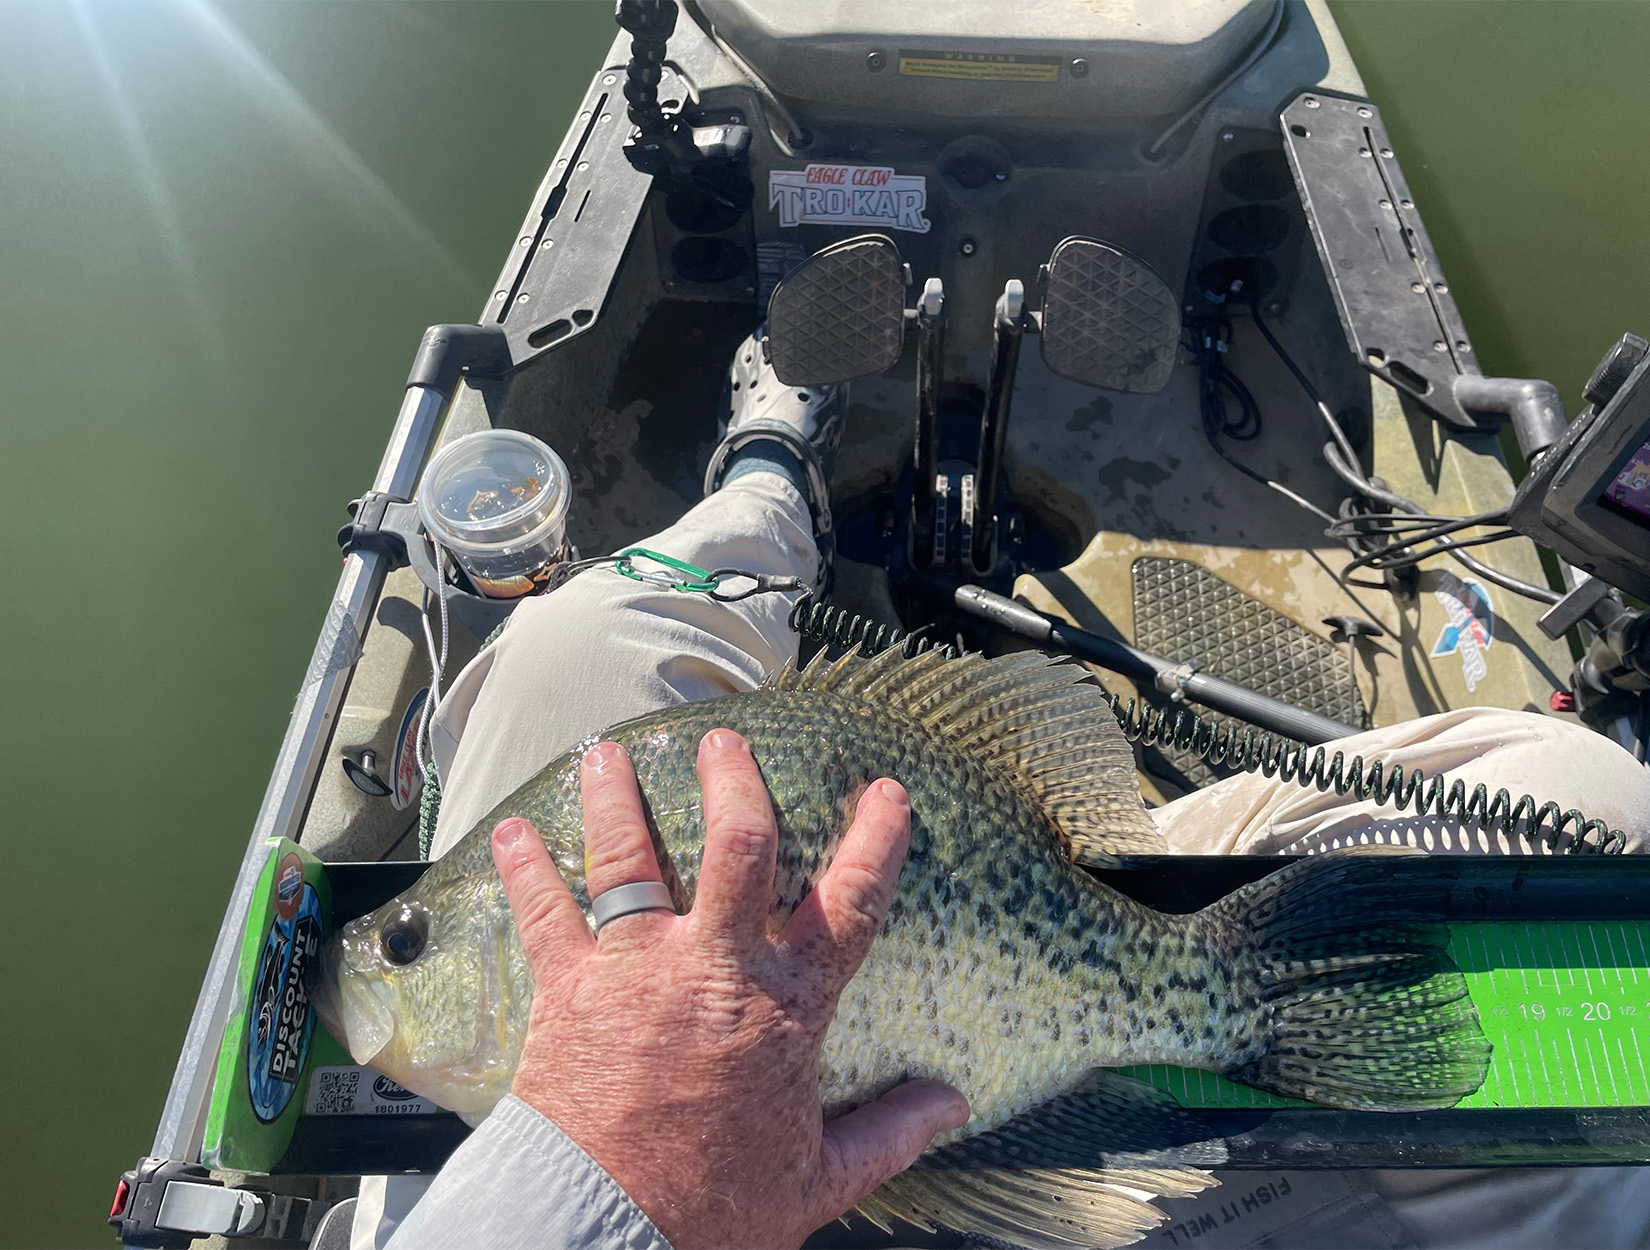 Kayak Angler Catches New State-Record Crappie with Forward Facing Sonar